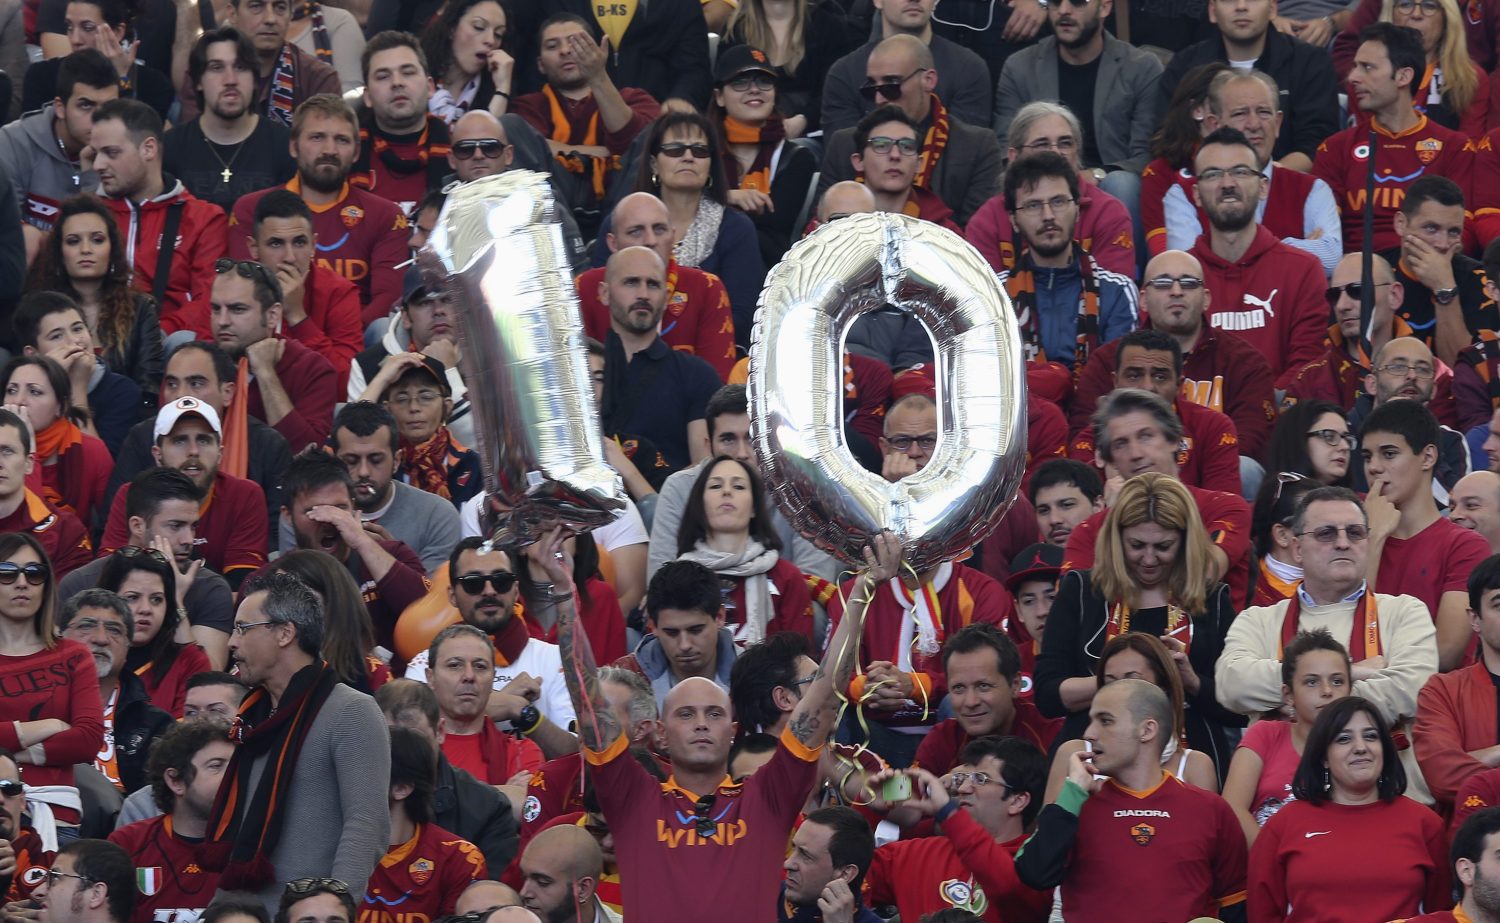 An soccer fan holds a number 10 before the Italian Cup final soccer match.